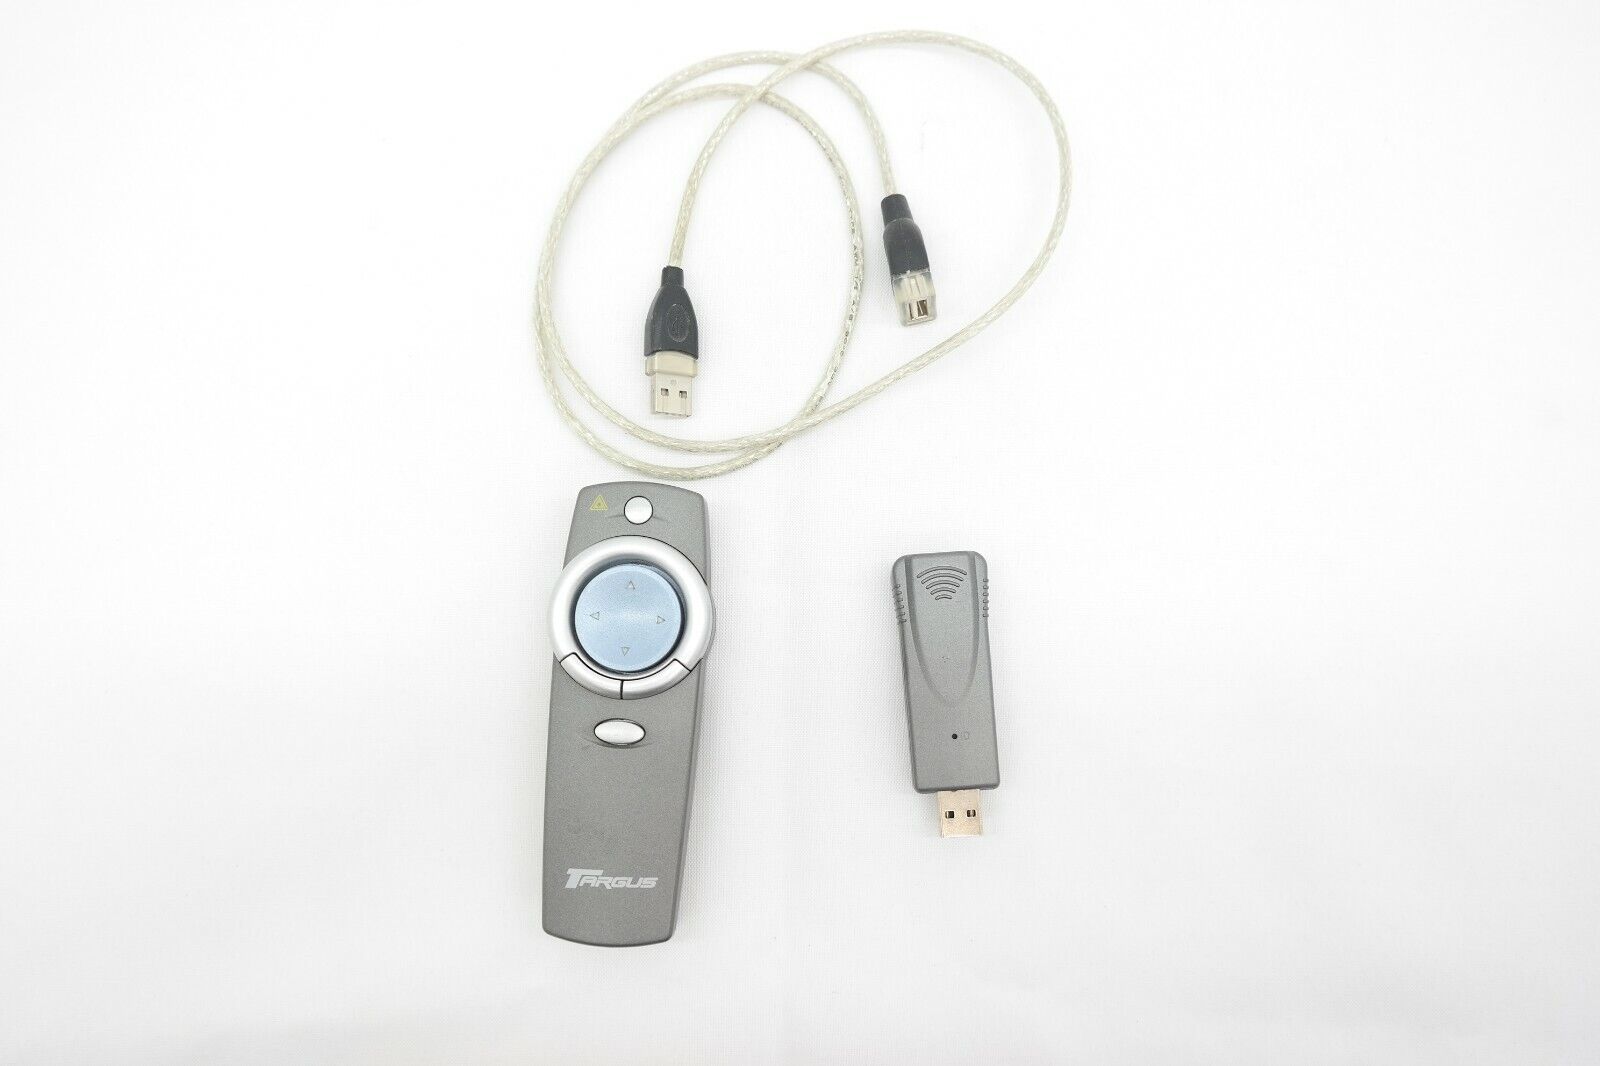 Targus PAUM30 Wireless Remote Presenter Control with Dongle AK